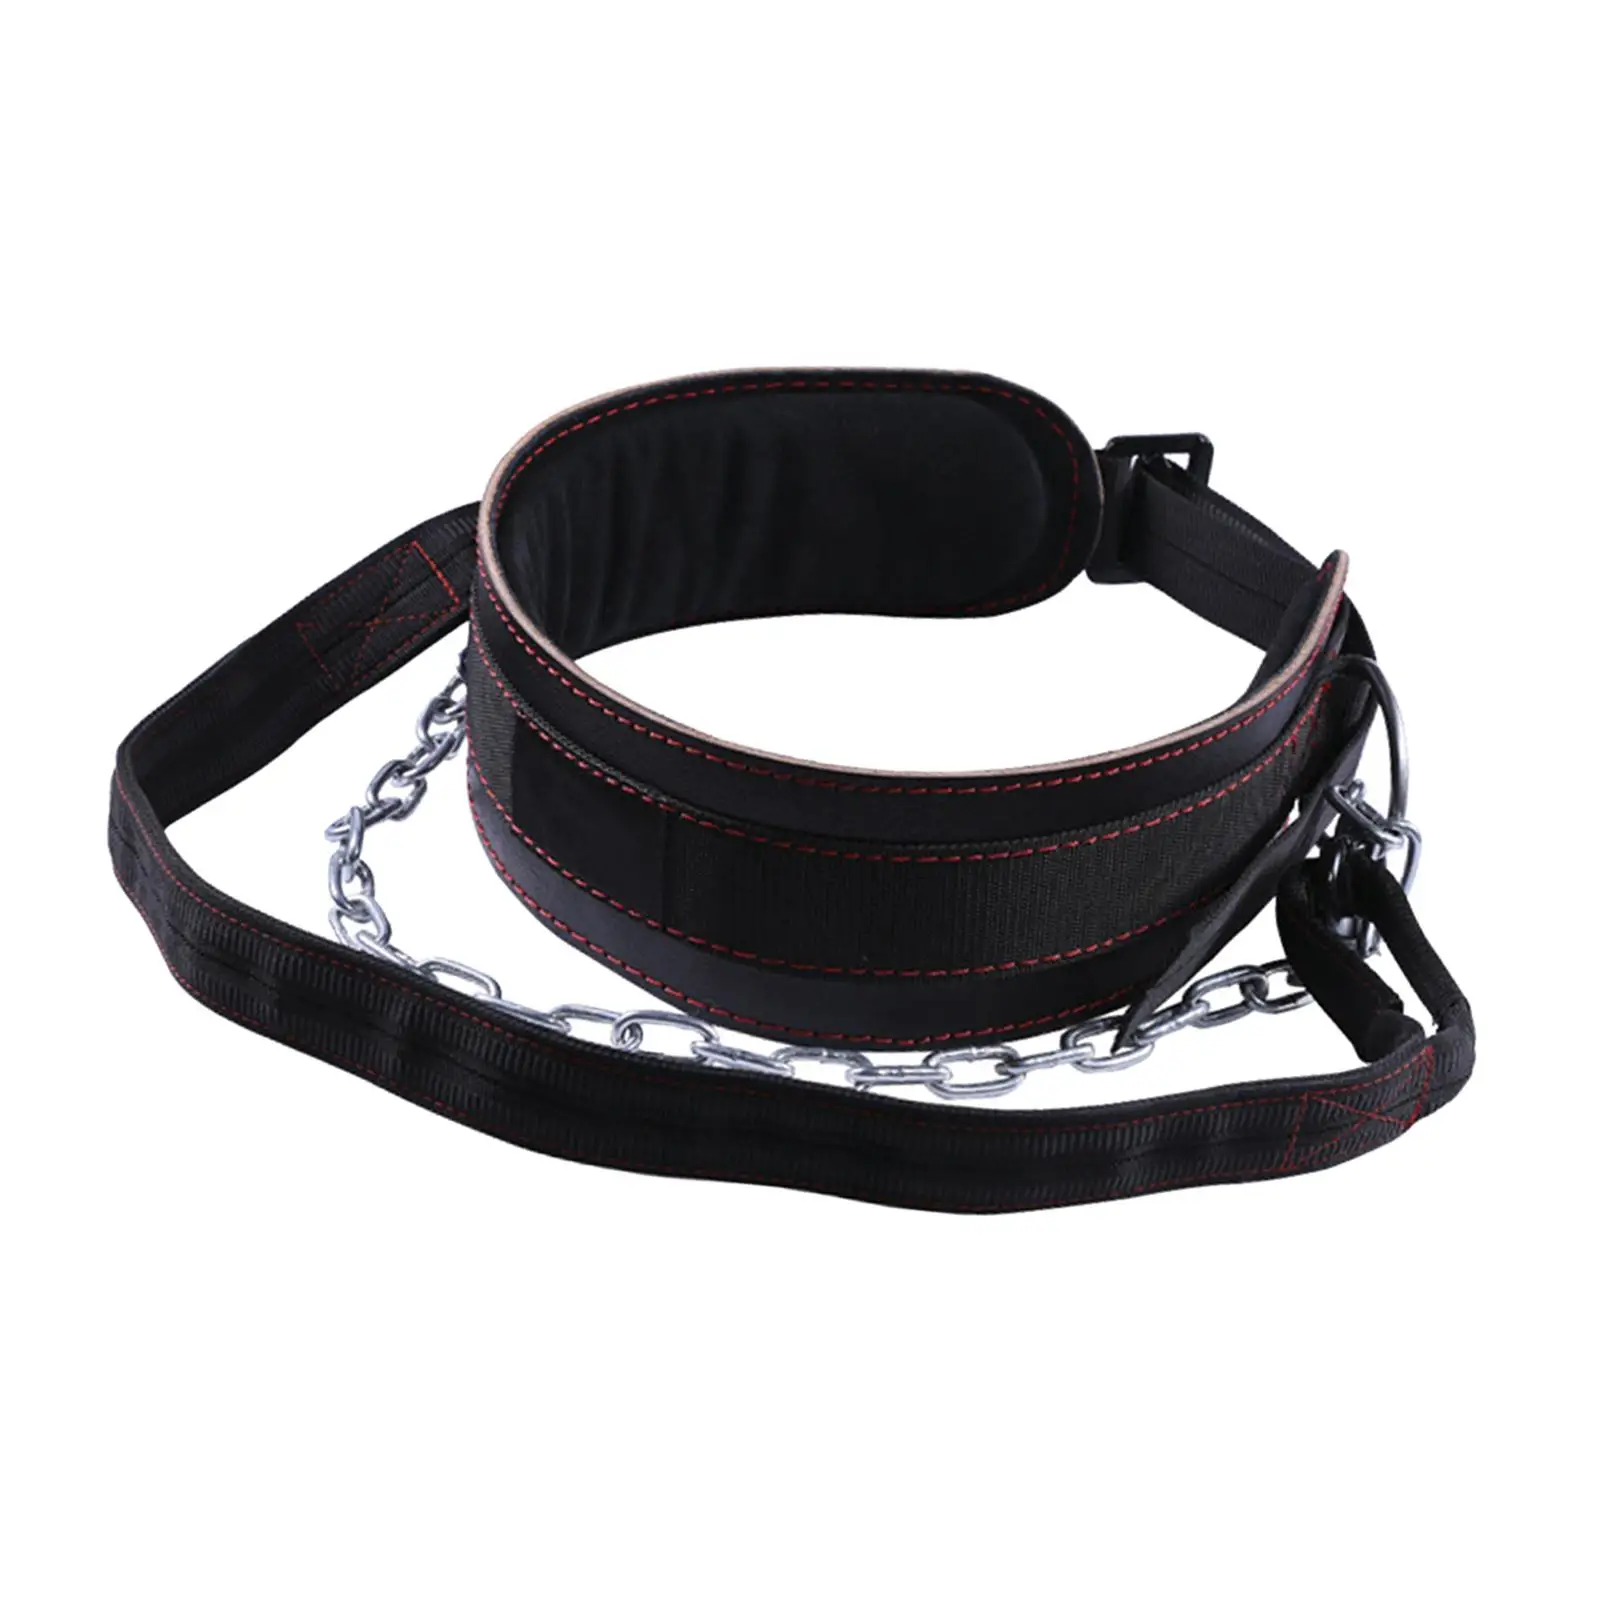 PU Dip Belt with Metal Chain Chin Workout Multifunction Adjustable Chain Lifting Belt for Weight Lifting Bodybuilding Training